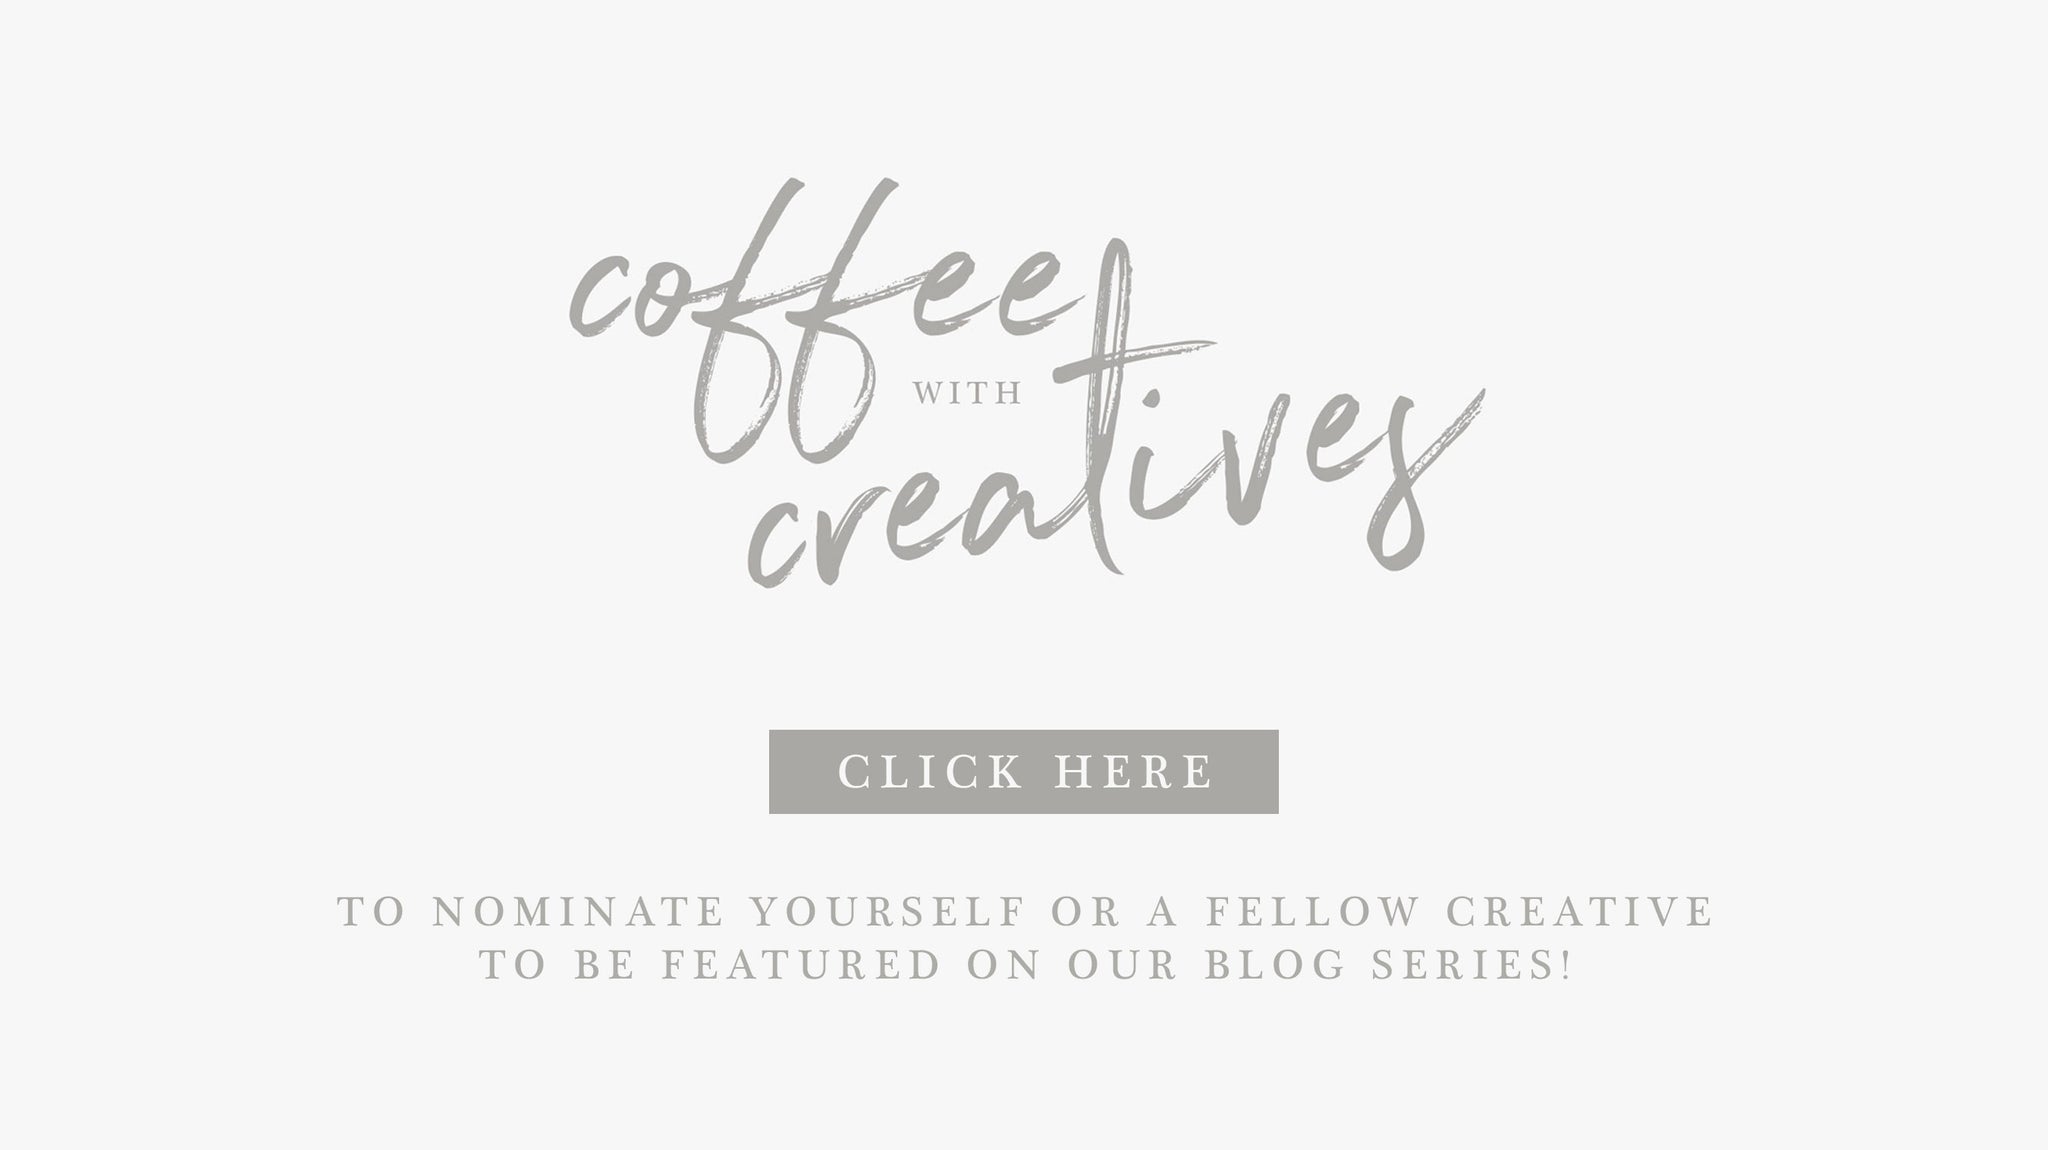 Nominate yourself or someone you think would be an inspiration to our community of photographers and creatives and be a guest on our blog series!